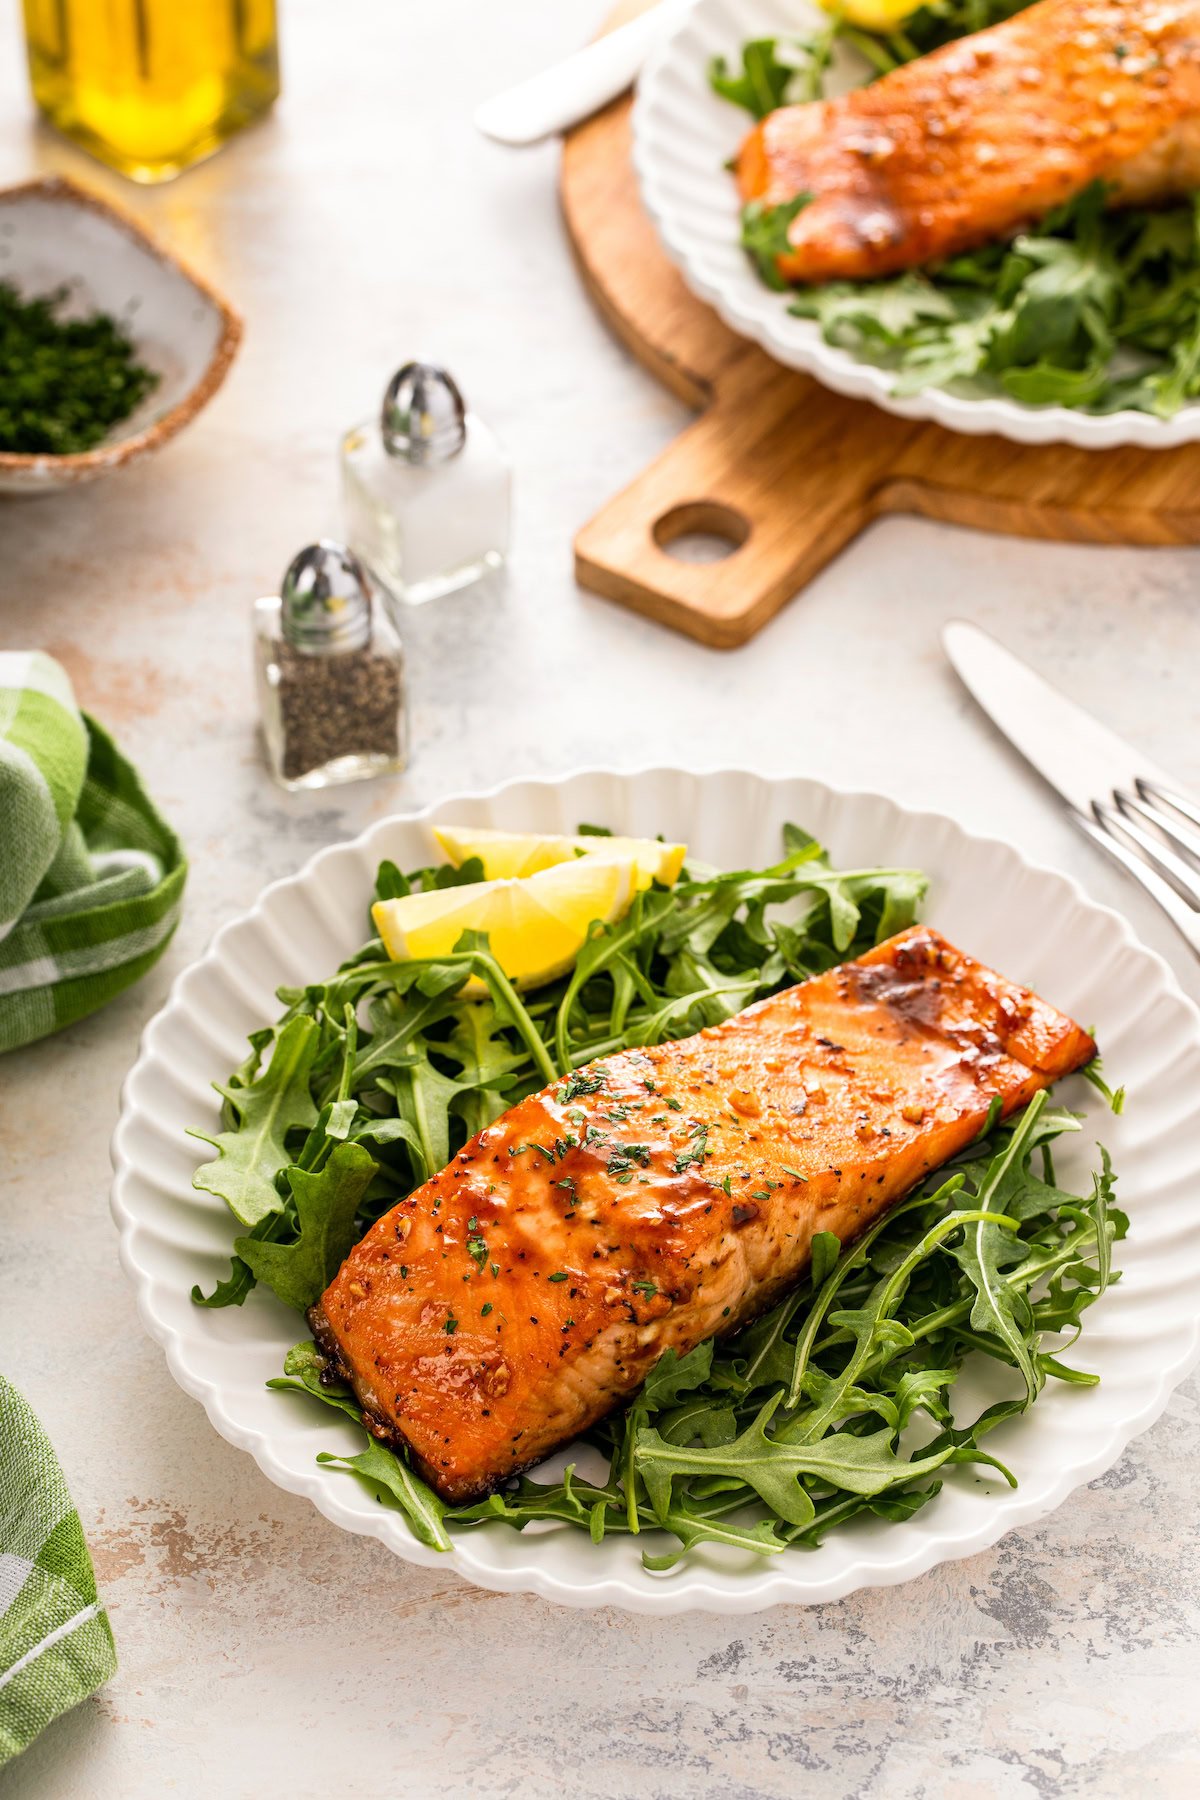 Juicy, balsamic salmon with fresh salad and lemon wedges on the side.